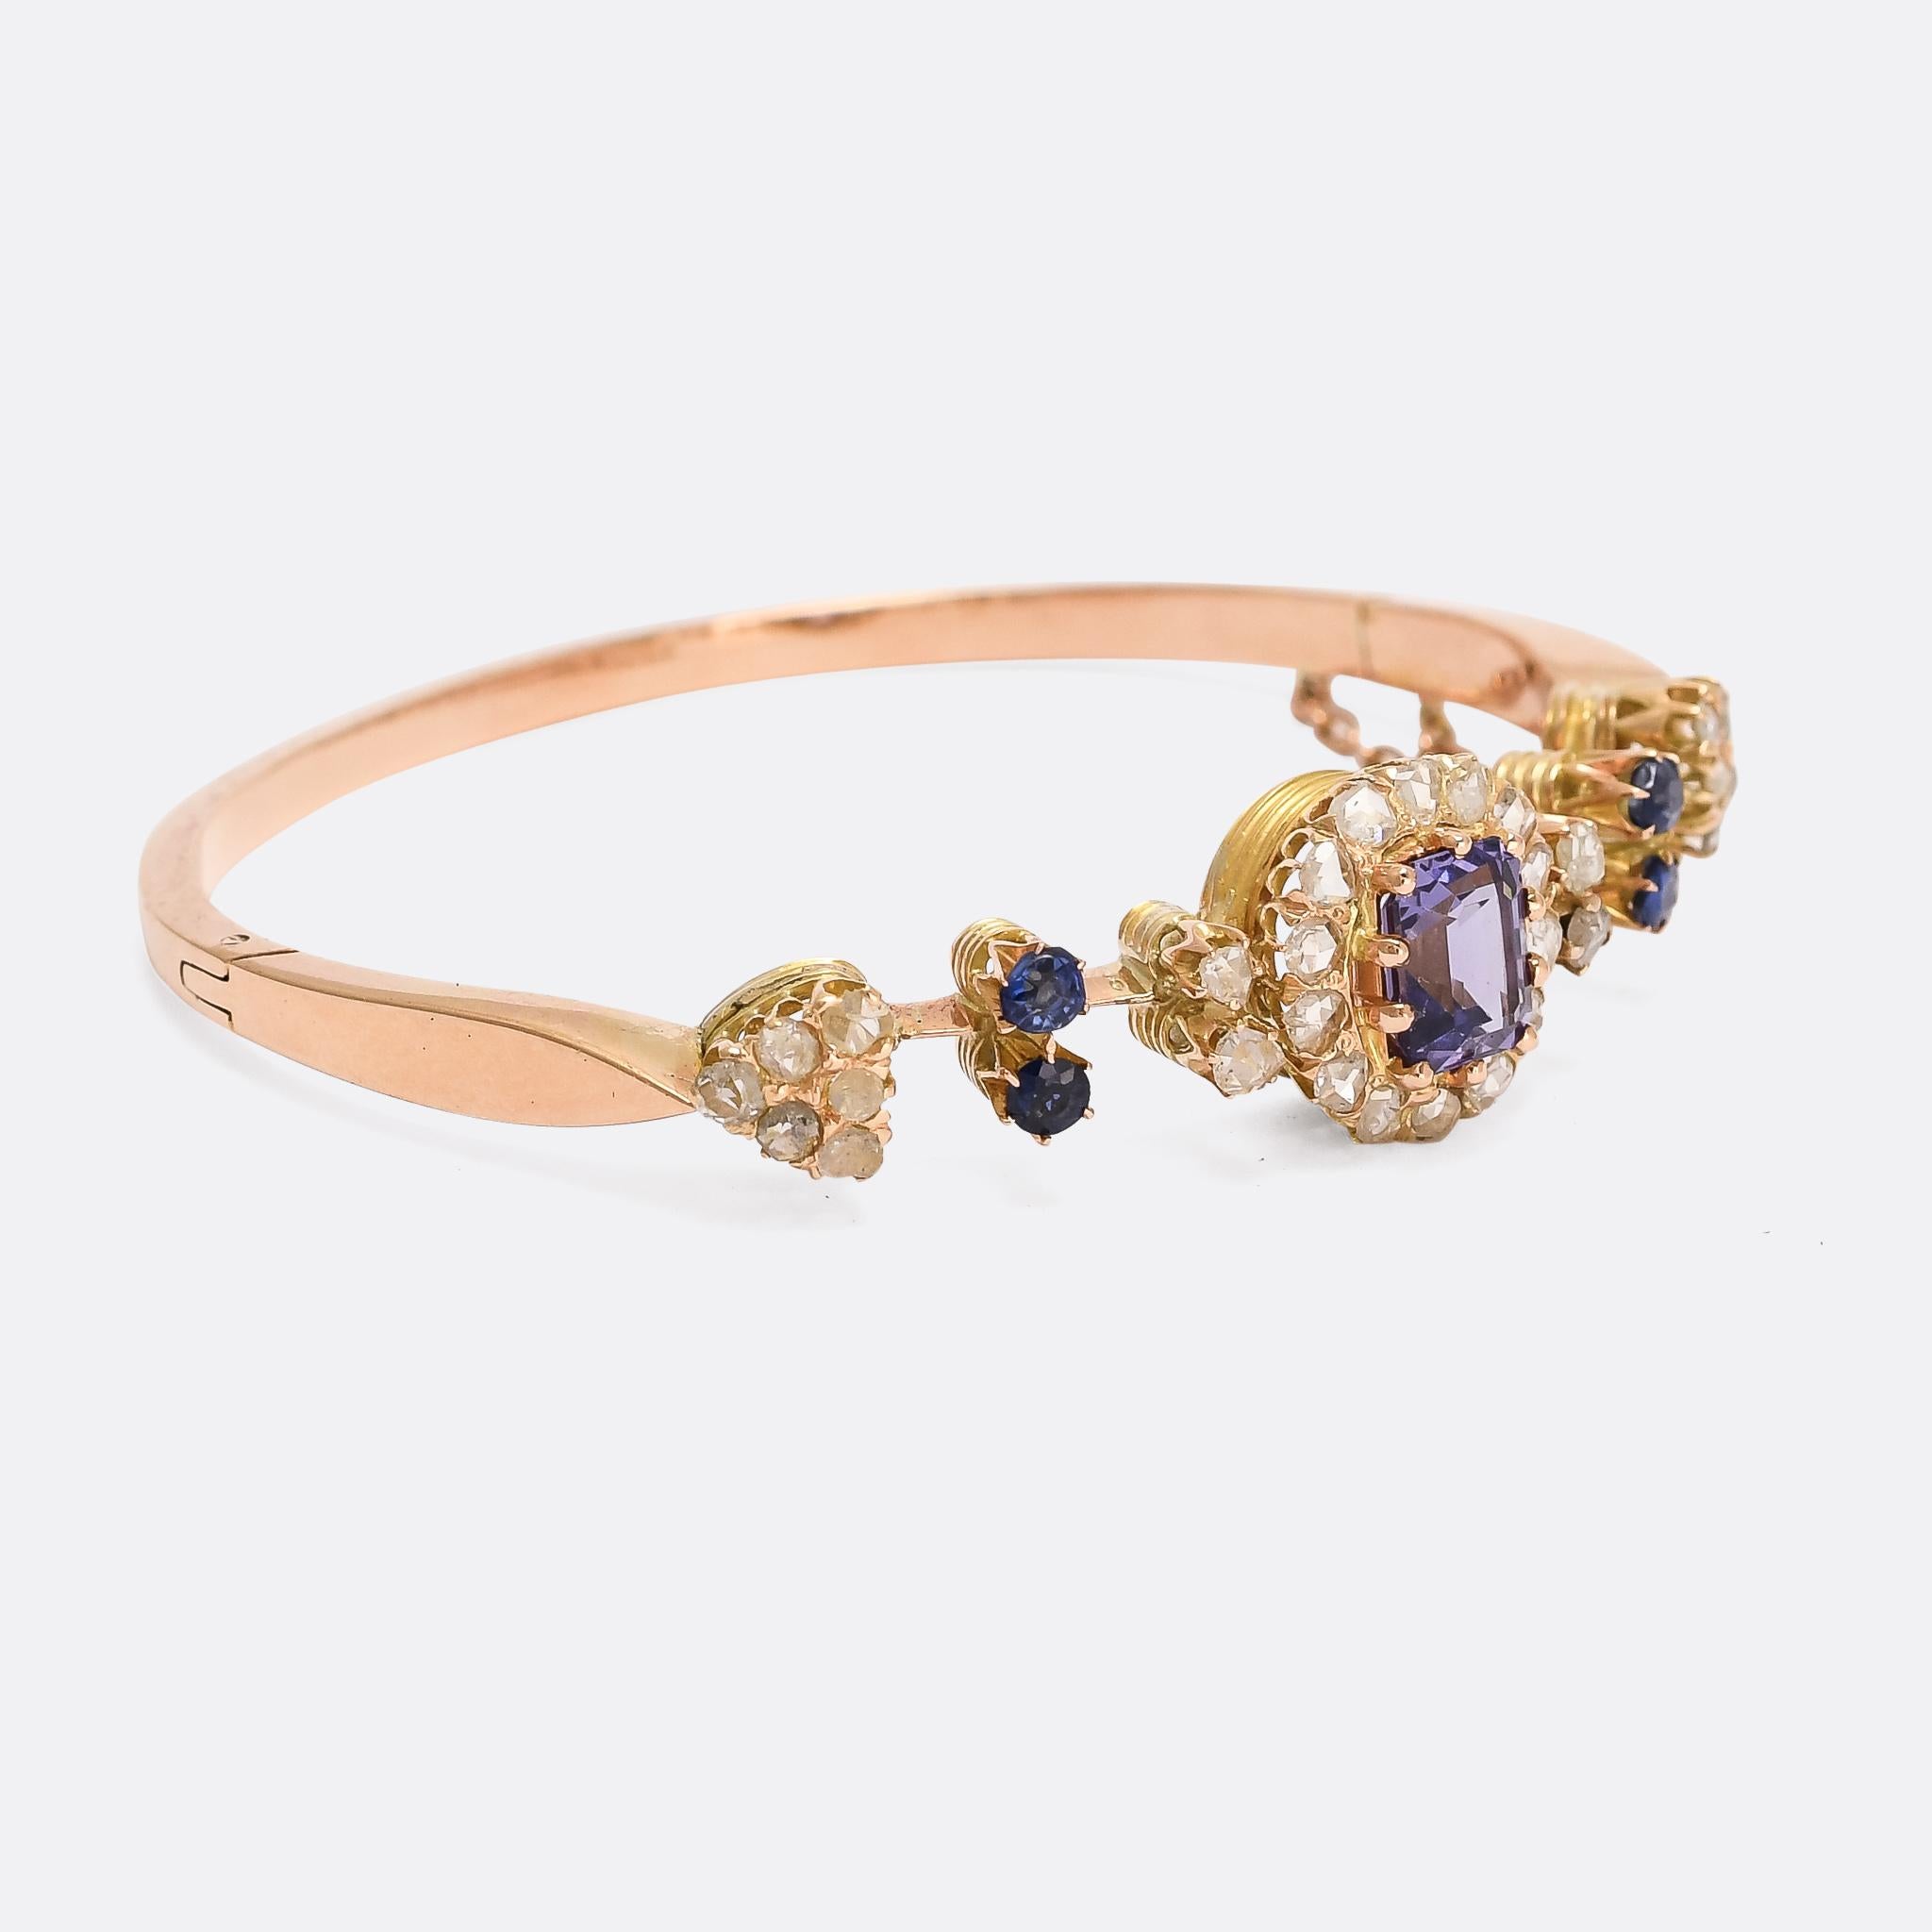 A stunning antique bangle set with vibrant blue spinels and rose cut diamonds. The central stone, set within a diamond halo, is certified at 2.7 carats natural intense blue spinel with no indications of heat treatment and no visible inclusions; it's